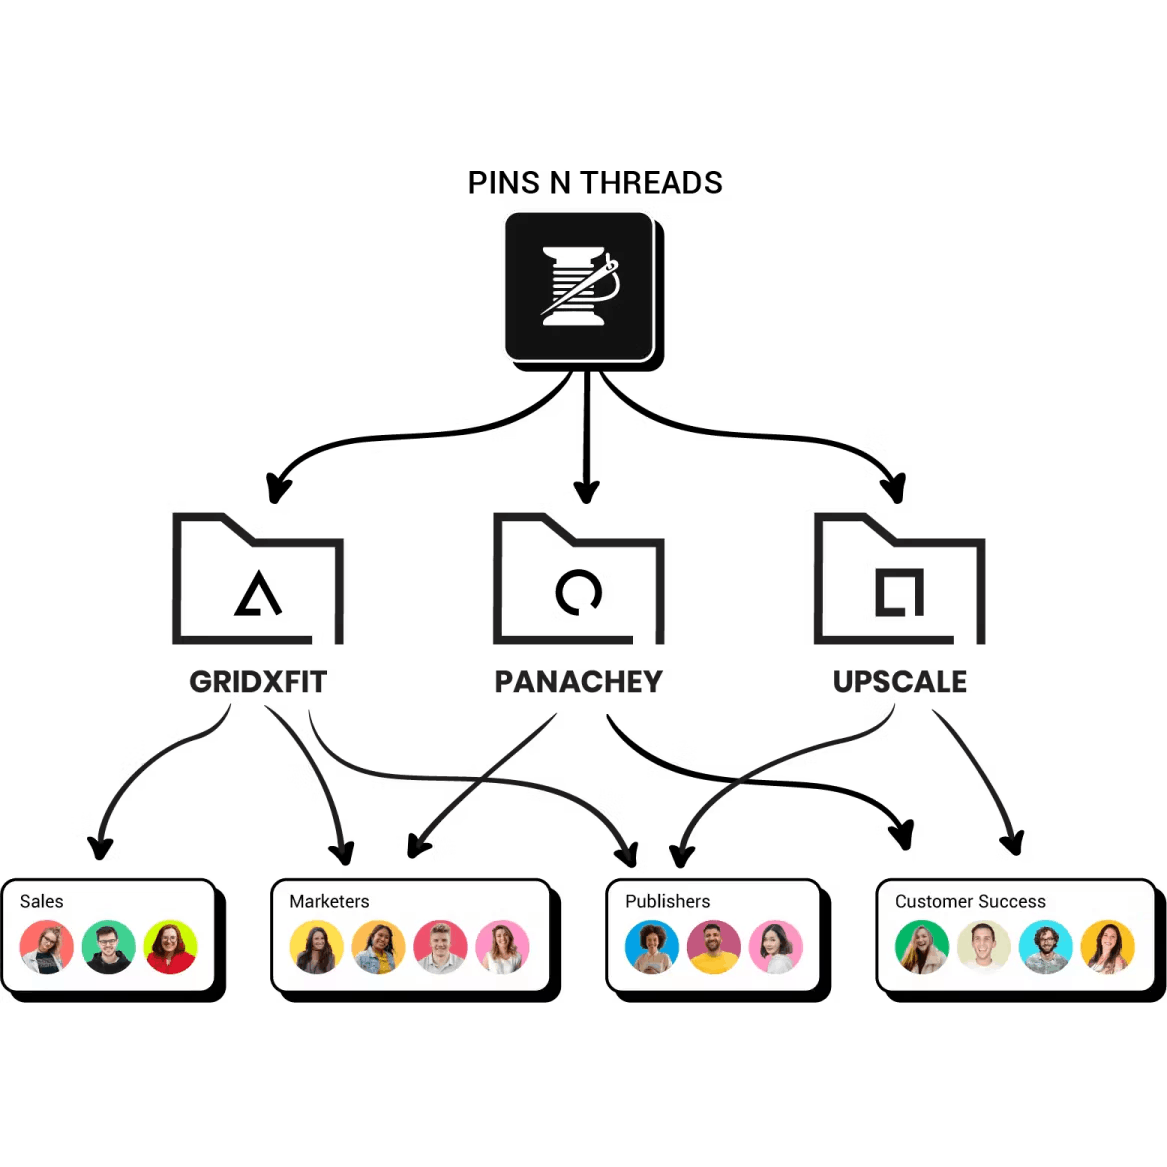 An-image-presenting-the-hierarchical-permissions-structure (Statusbrew)